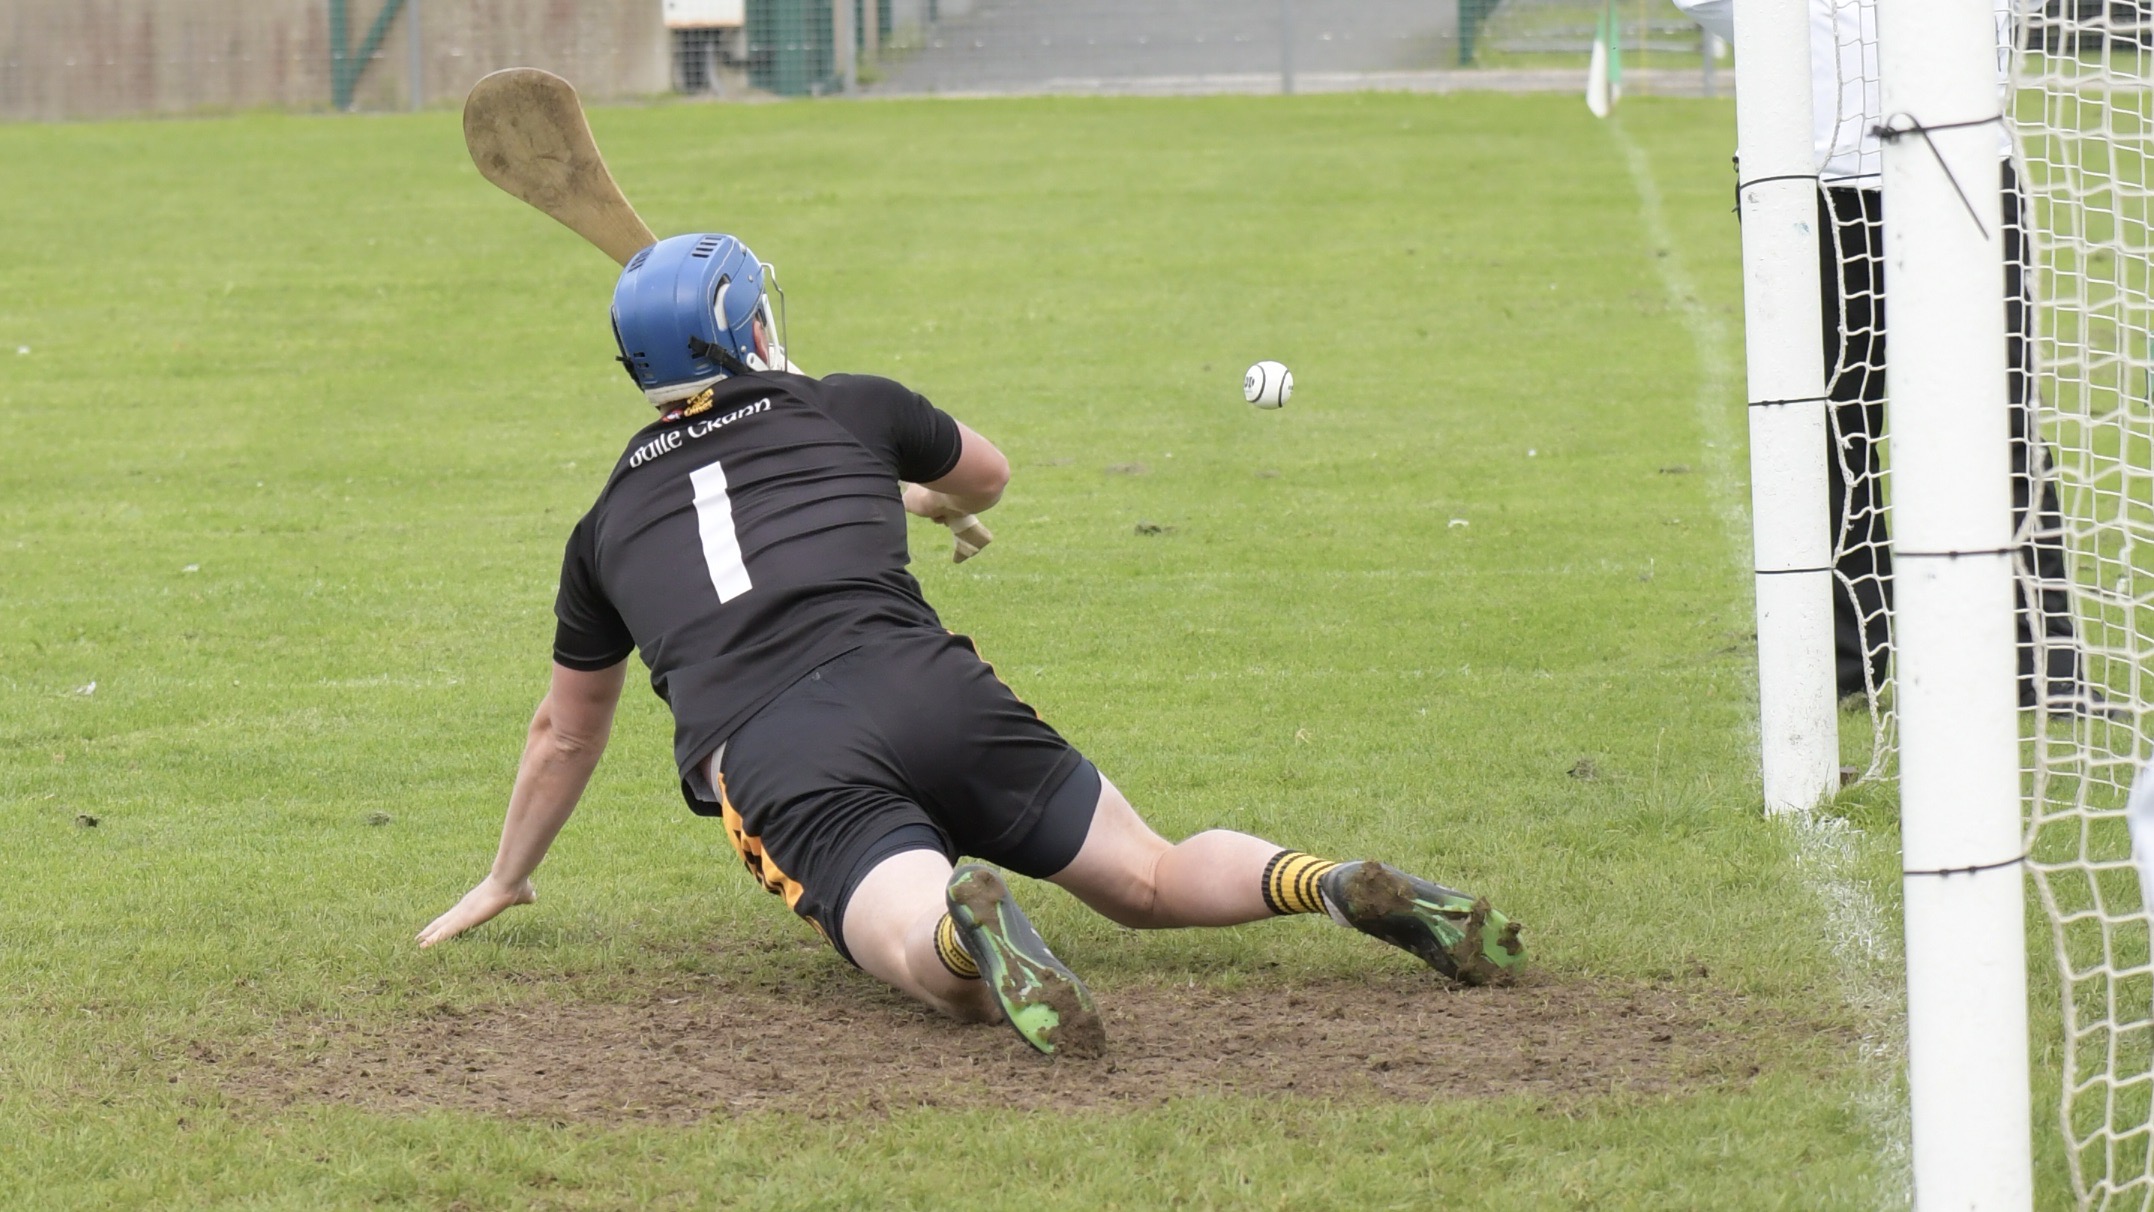 Ballycran’s Down GAA SHC campaign still has a ‘way to go’ after Sunday’s result